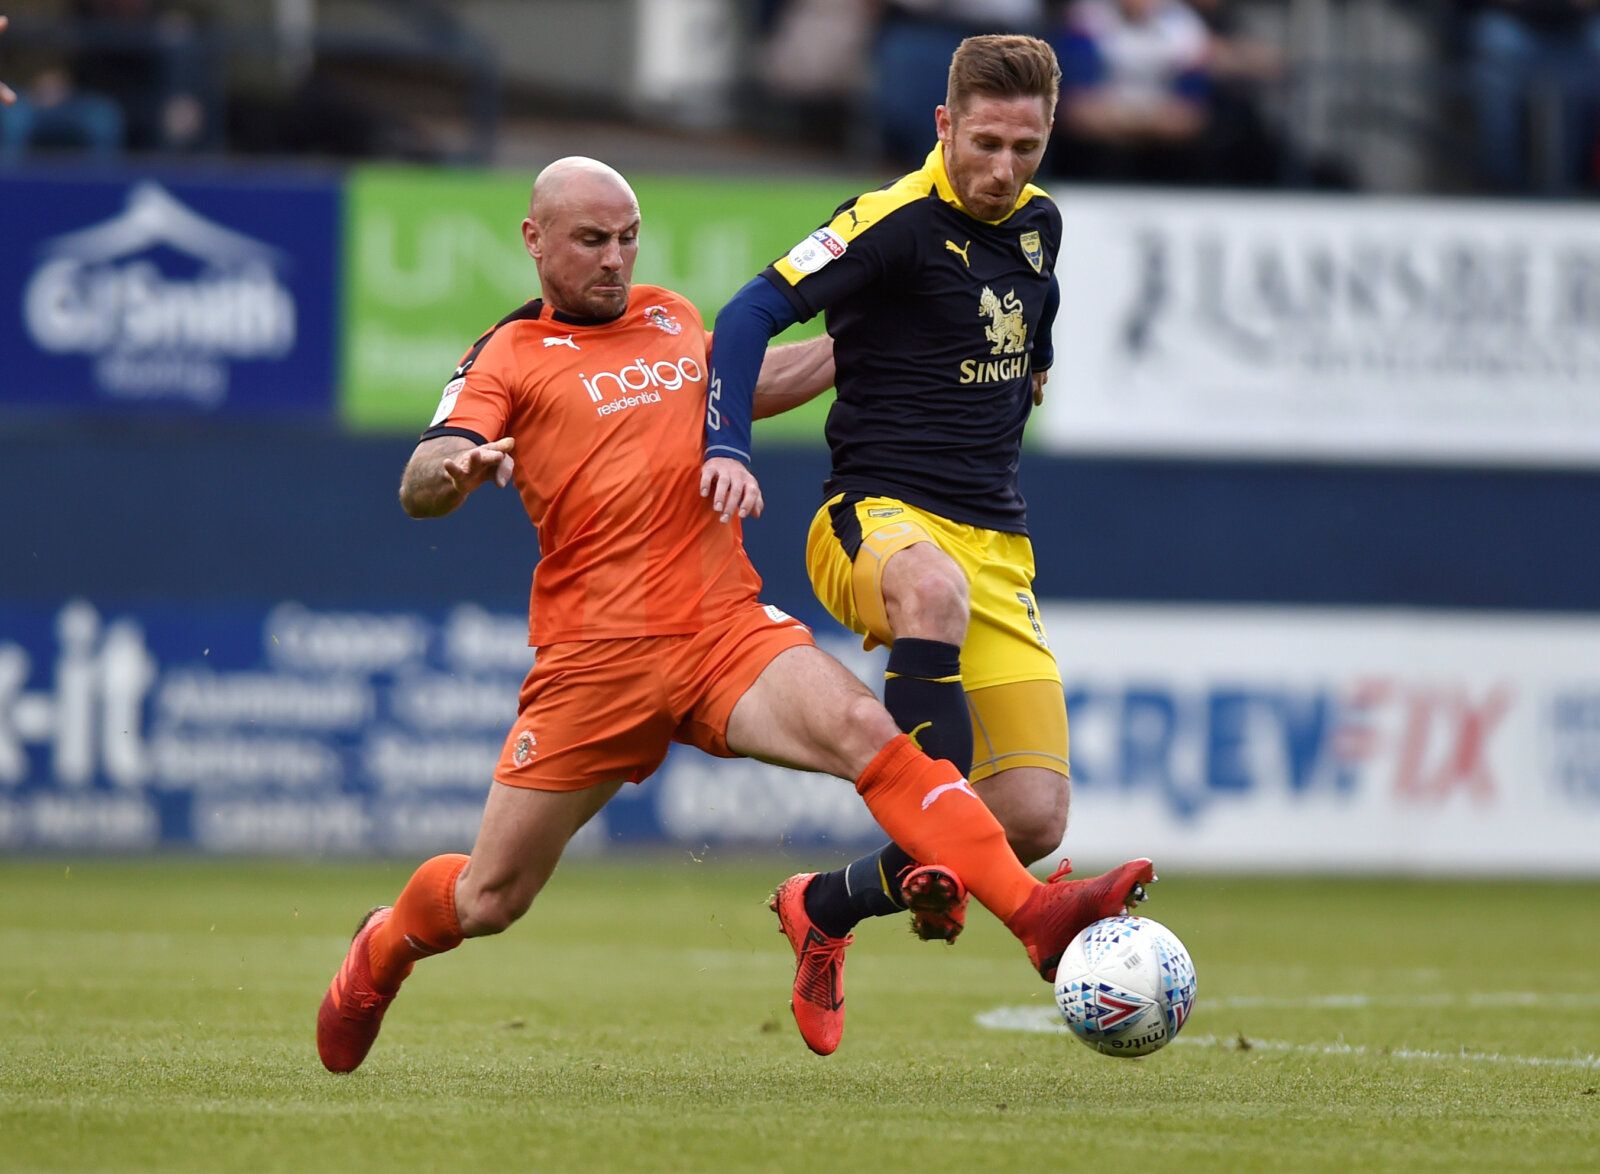 Soccer Football - League One - Luton Town v Oxford United - Kenilworth Road, Luton, Britain - May 4, 2019  Luton Town's Alan McCormack in action with Oxford United's James Henry  Action Images/Adam Holt  EDITORIAL USE ONLY. No use with unauthorized audio, video, data, fixture lists, club/league logos or 